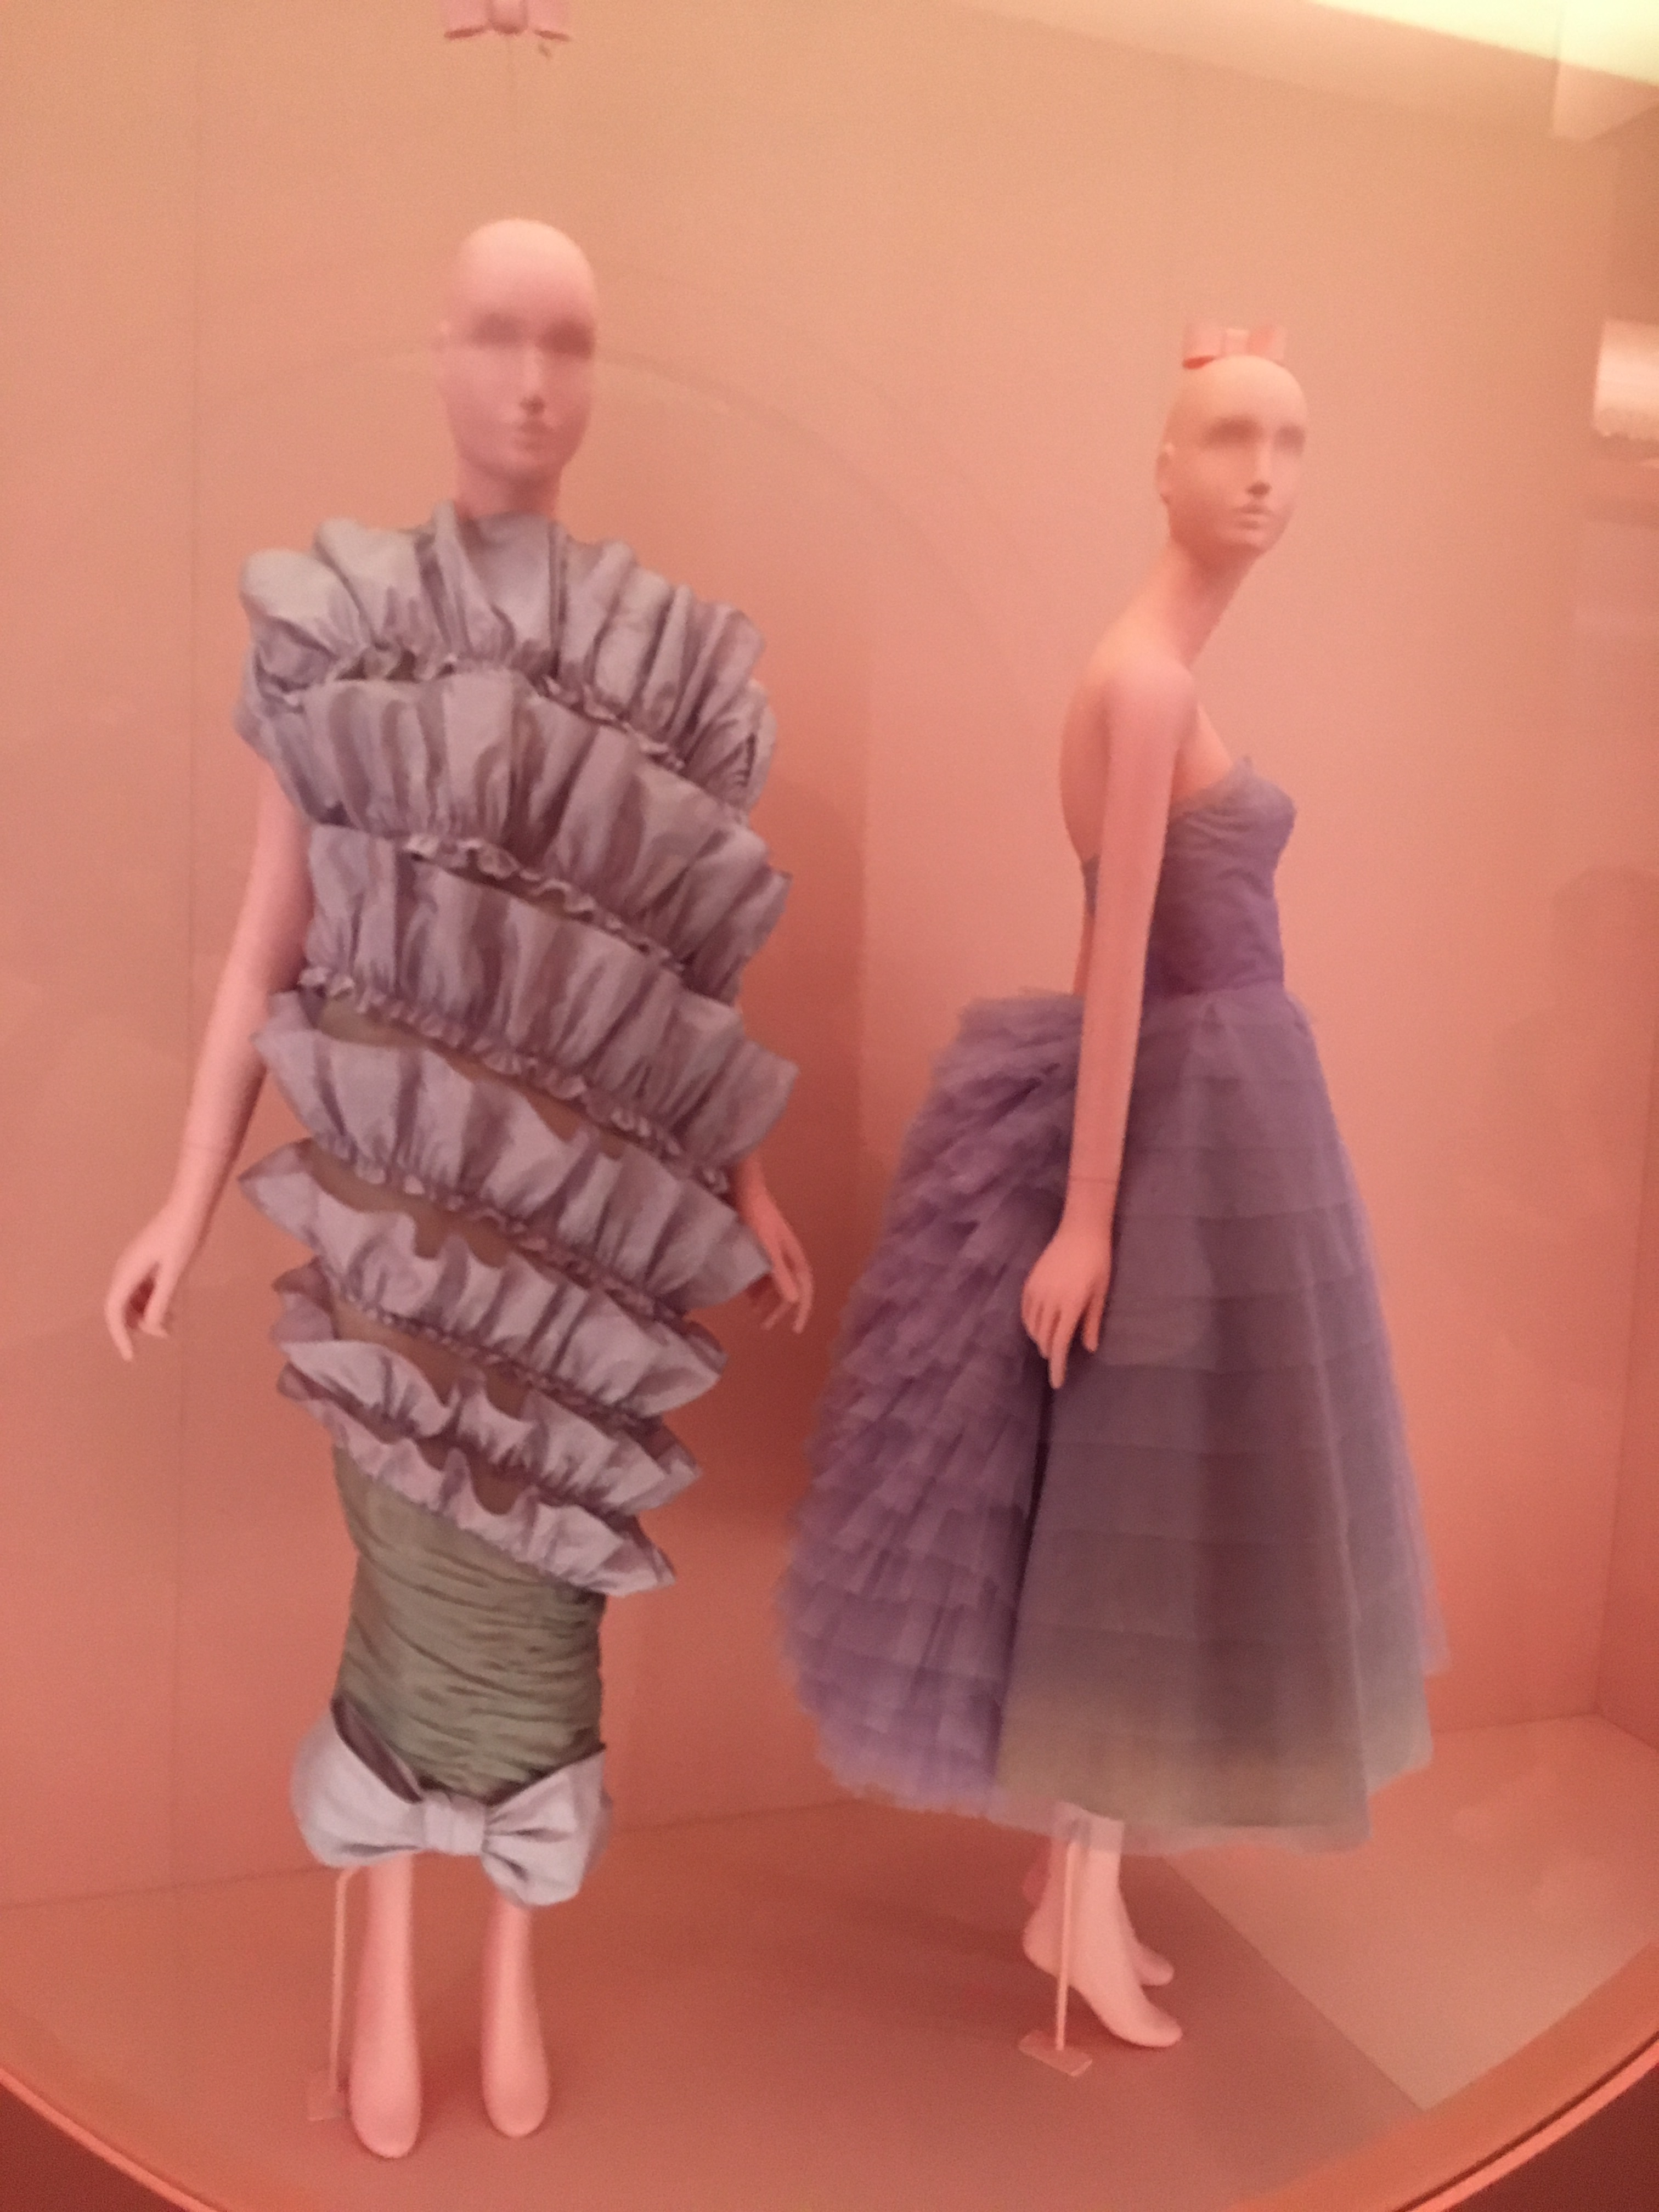 Camp: Notes On Fashion (Images From The Exhibit)